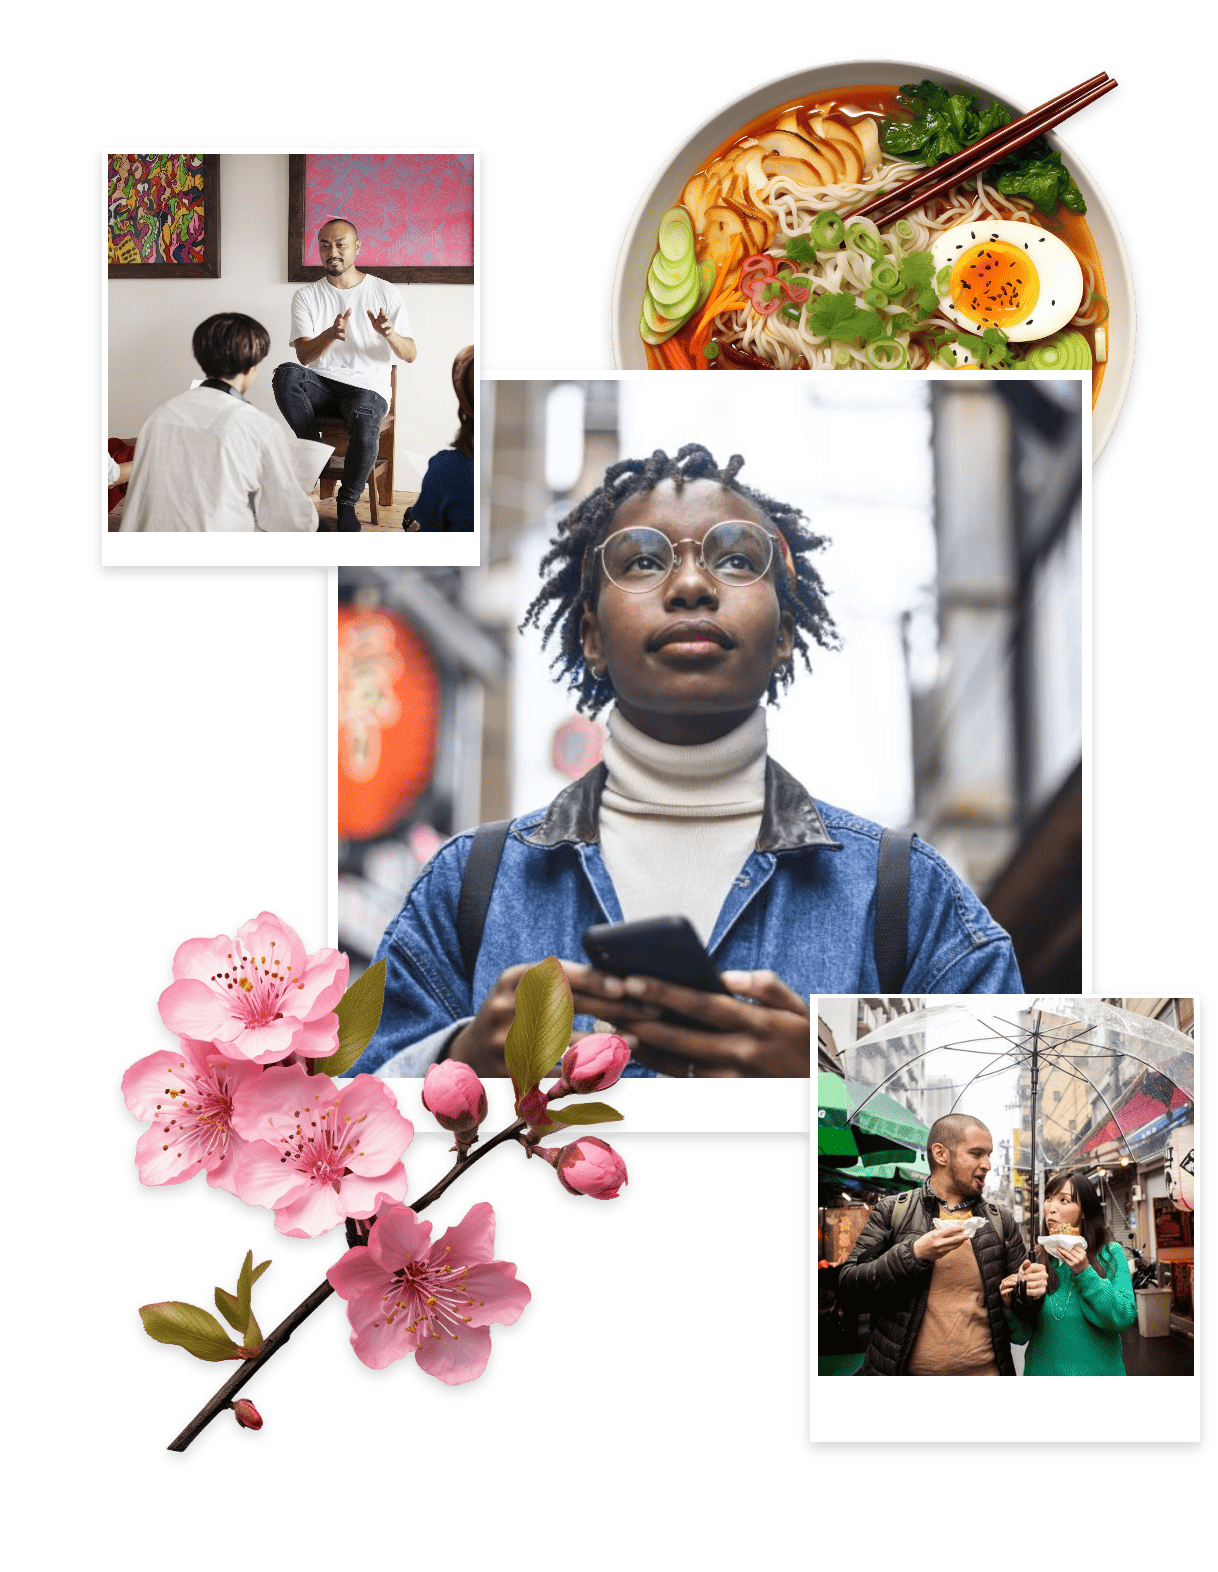 A collage of diverse images: a lesson between a male and a young male client, a bowl of Asian noodle soup, a young black woman with glasses in an urban setting, cherry blossoms and a couple walking down the street holding an umbrella and eating a snack.